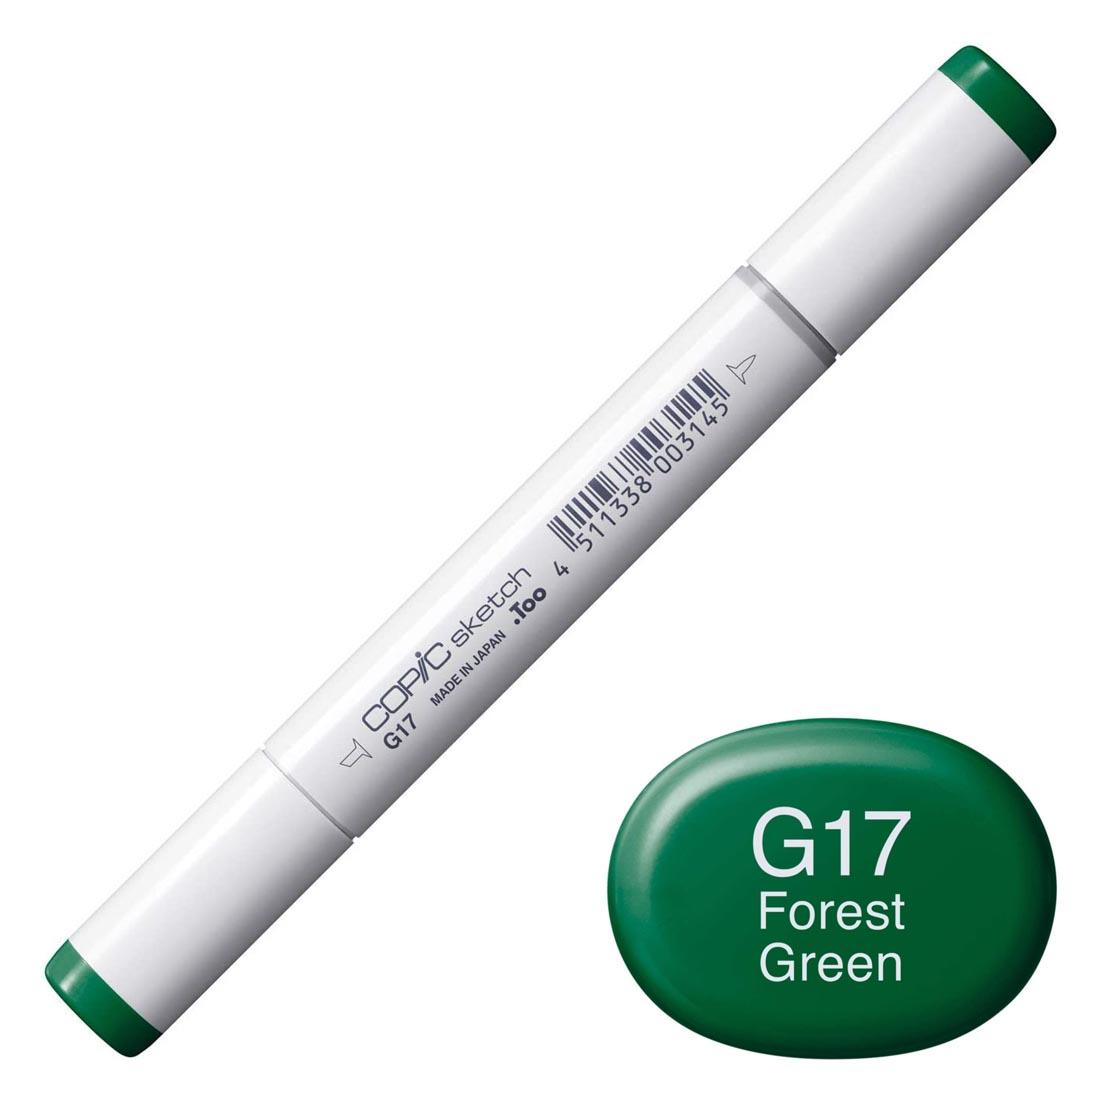 COPIC Sketch Marker with a color swatch and text of G17 Forest Green